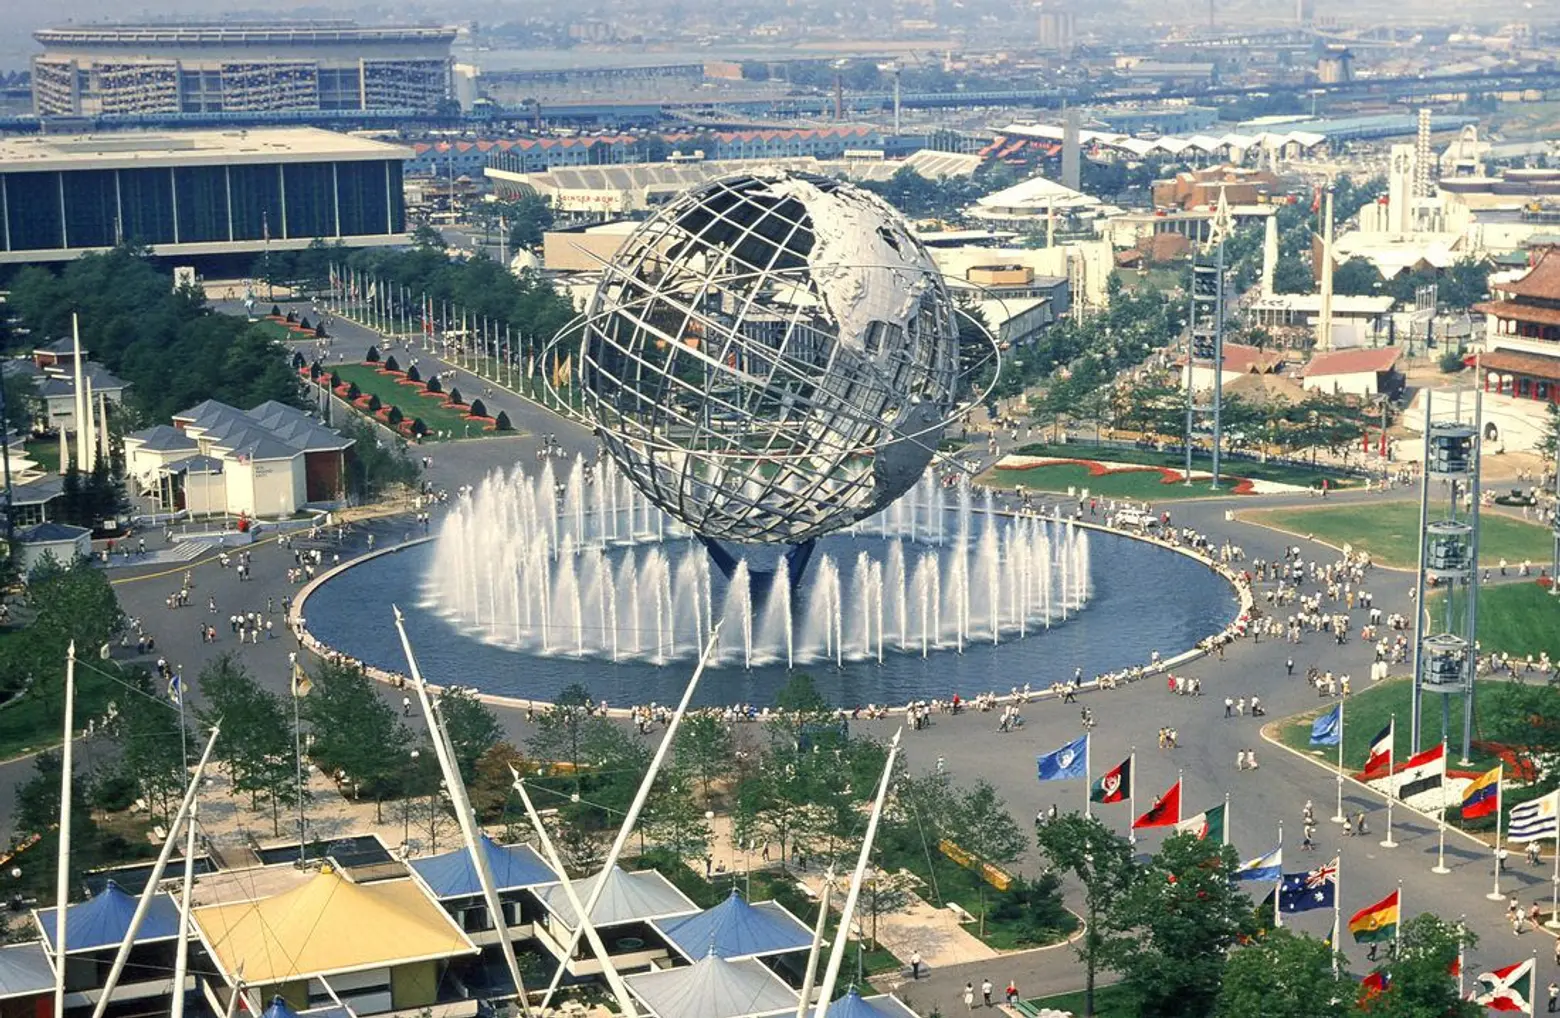 Uncover secrets of the World’s Fair with free, monthly walking tours of Flushing Meadows-Corona Park